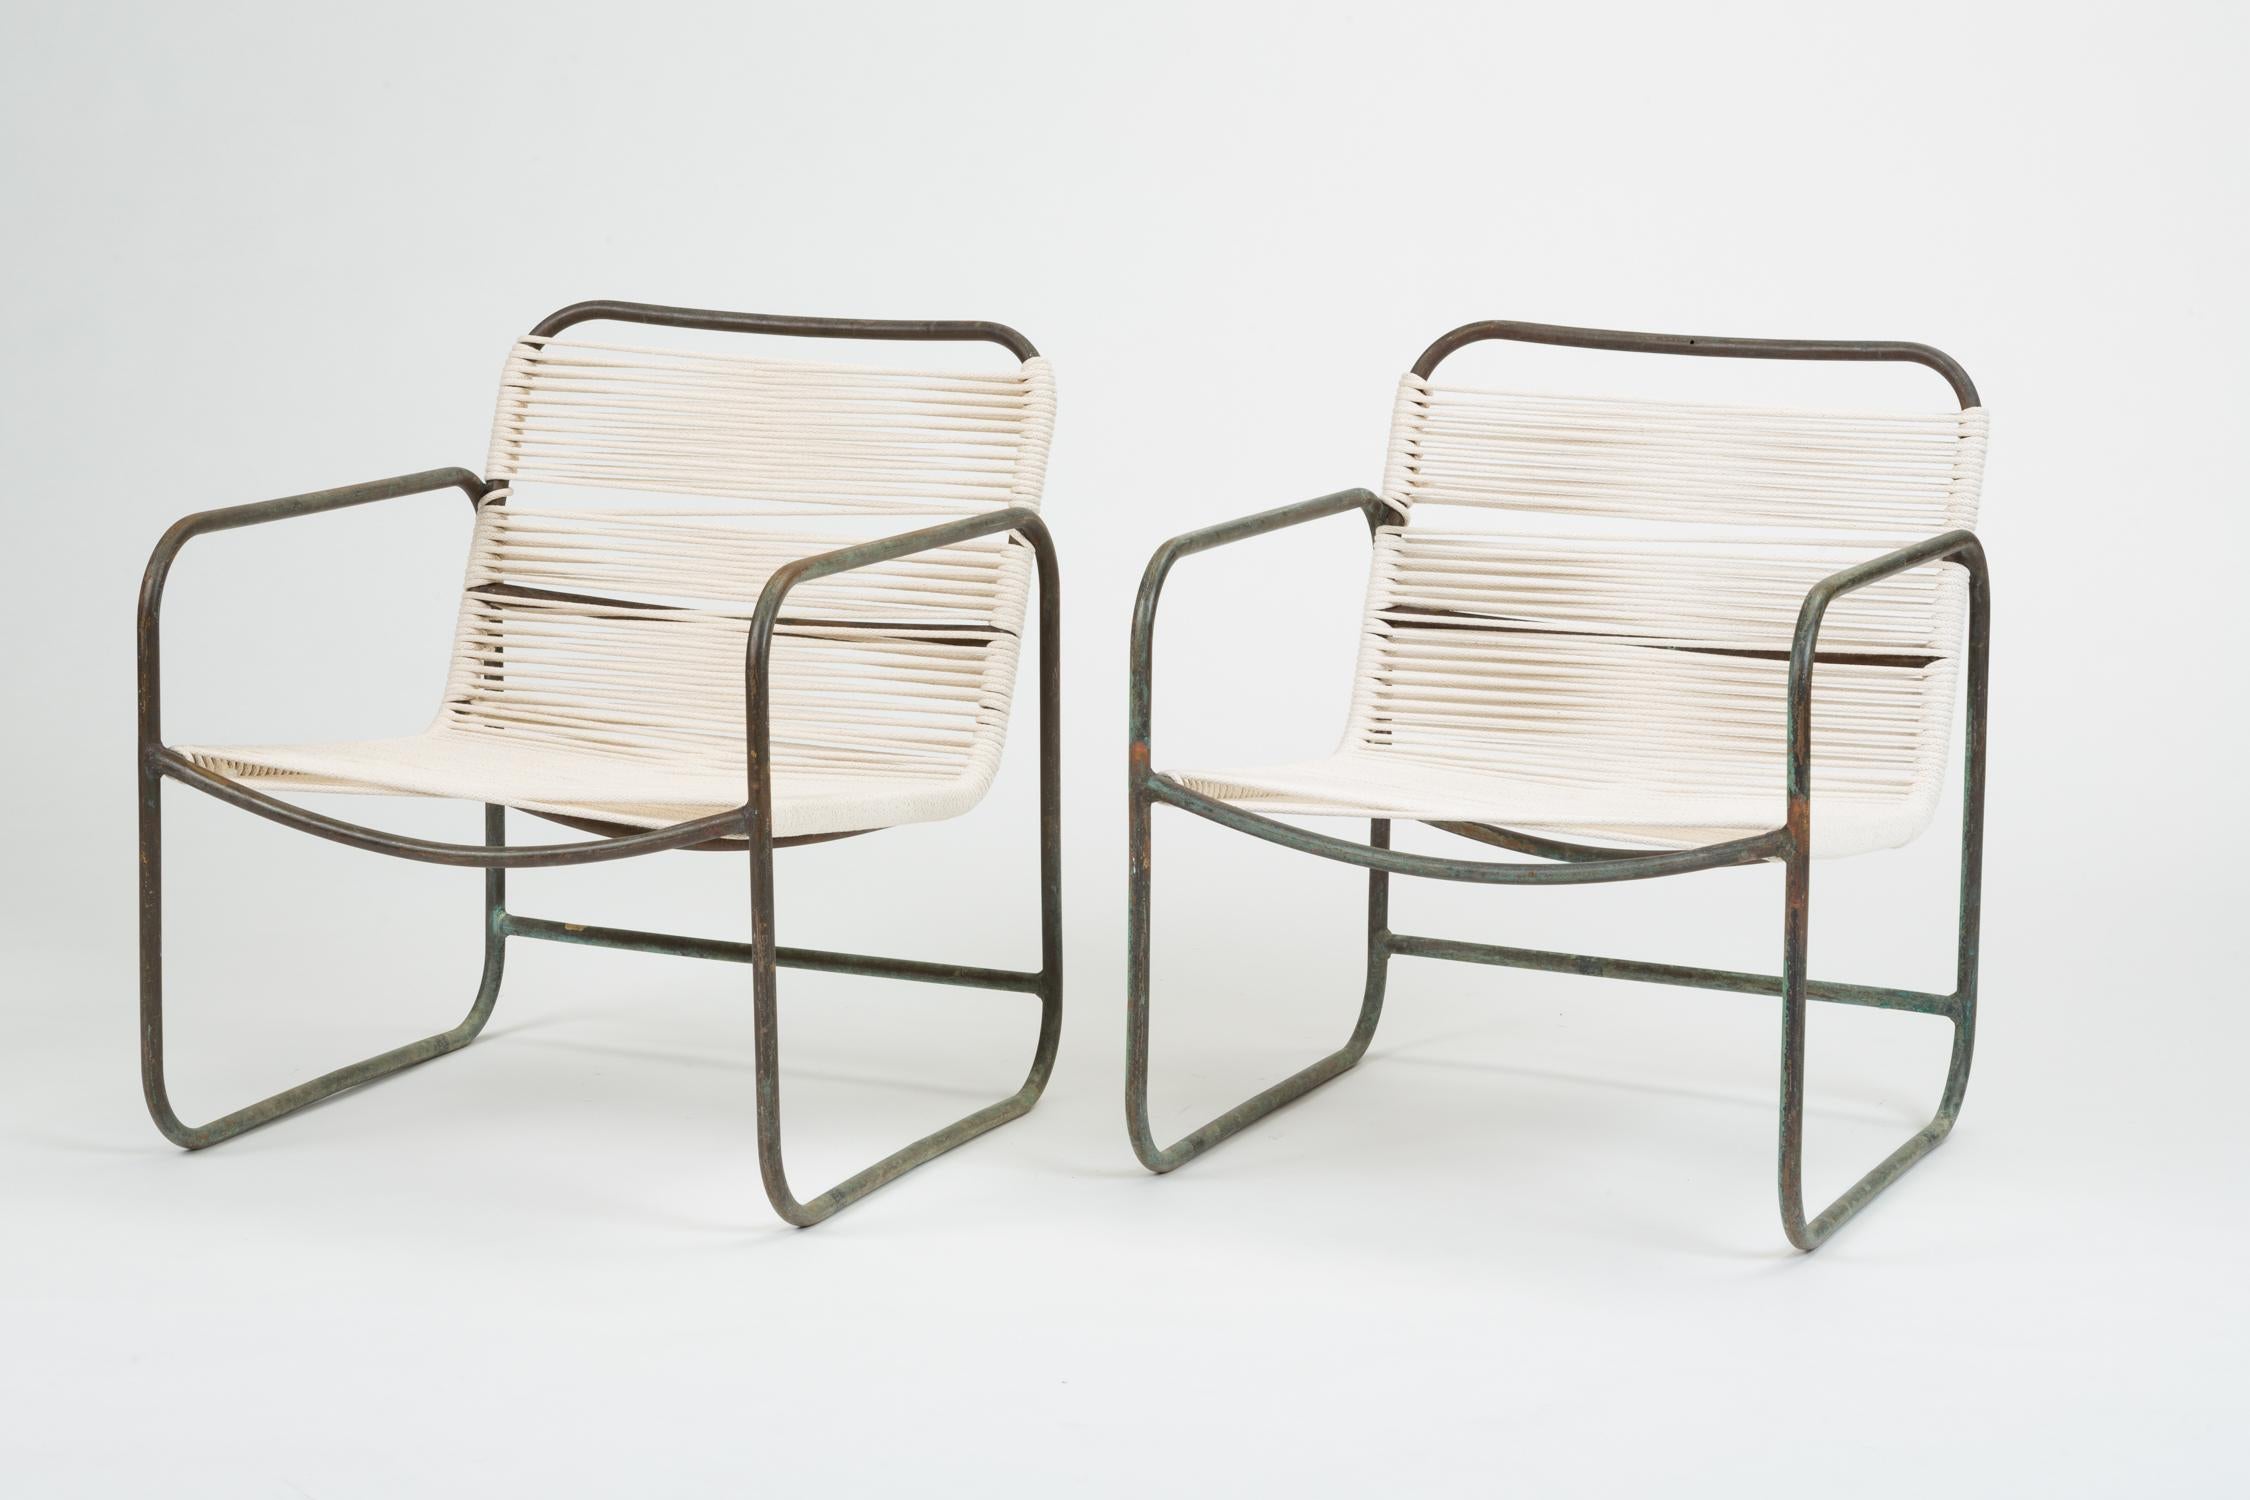 A single patio lounge chair from Kipp Stewart’s 1977 collection for Terra Furniture. The “Bronze Age” group featured frames of softly curved bronze tubing, with hammered glass and yacht cord accents for tables and seating, respectively. This compact